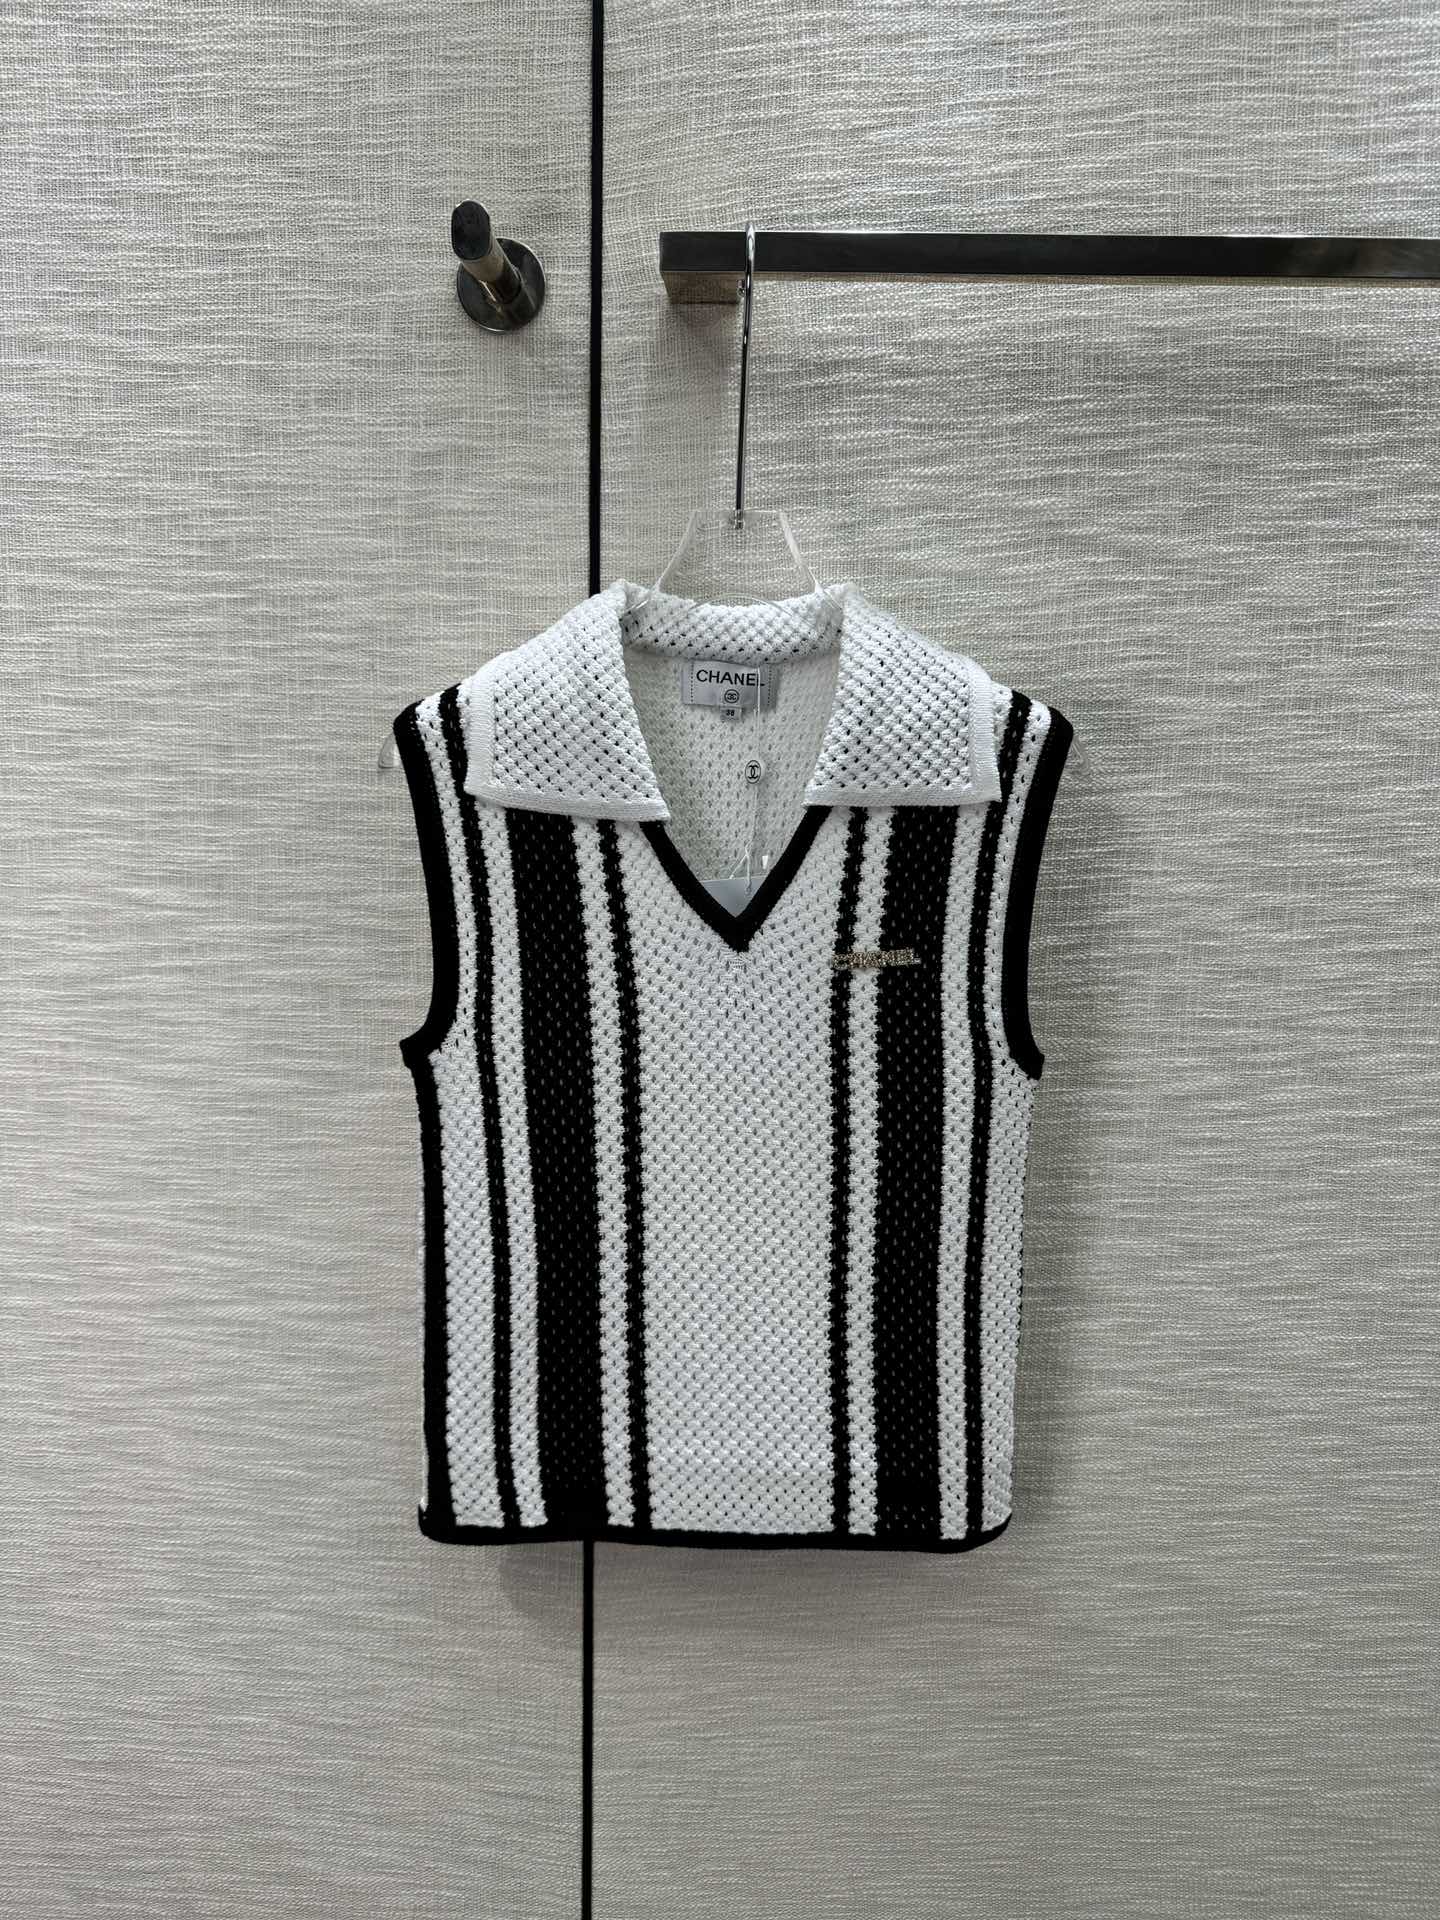 Chanel Cheap
 Clothing Polo Tank Tops&Camis Openwork Knitting Spring/Summer Collection